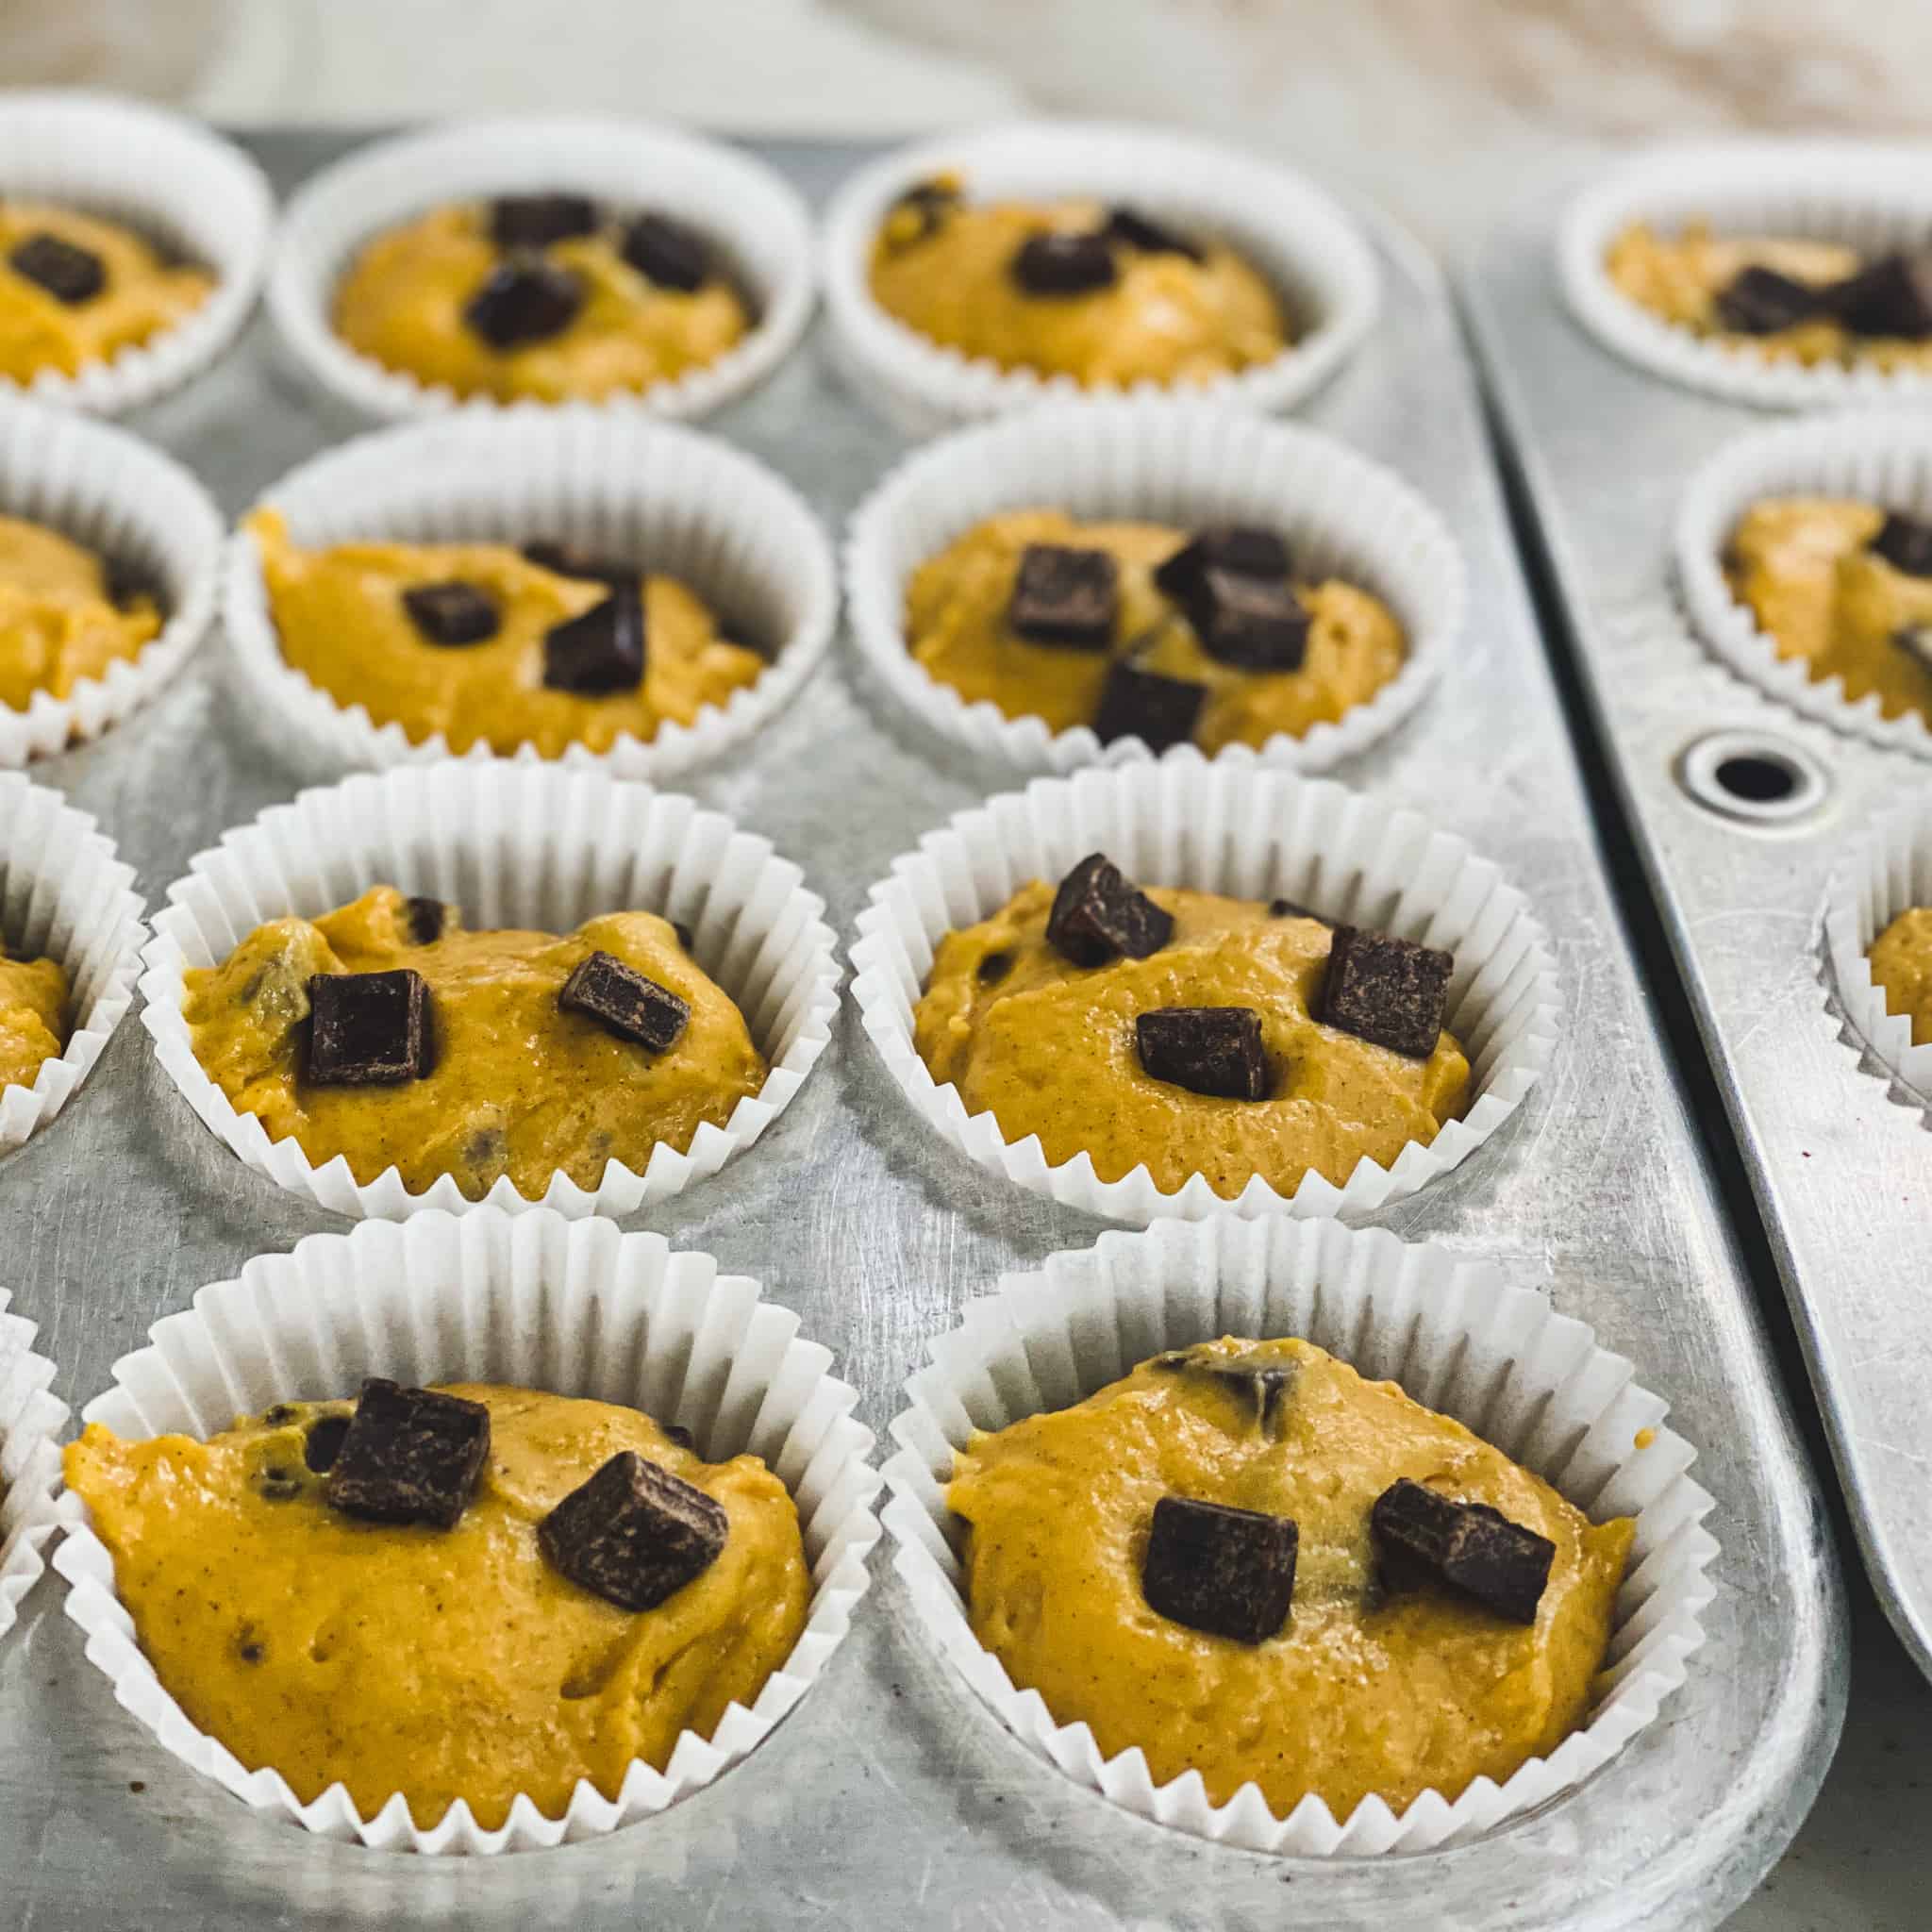 Pumpkin chocolate chunk muffins uncooked with extra chunks of chocolate sprinkled over top.